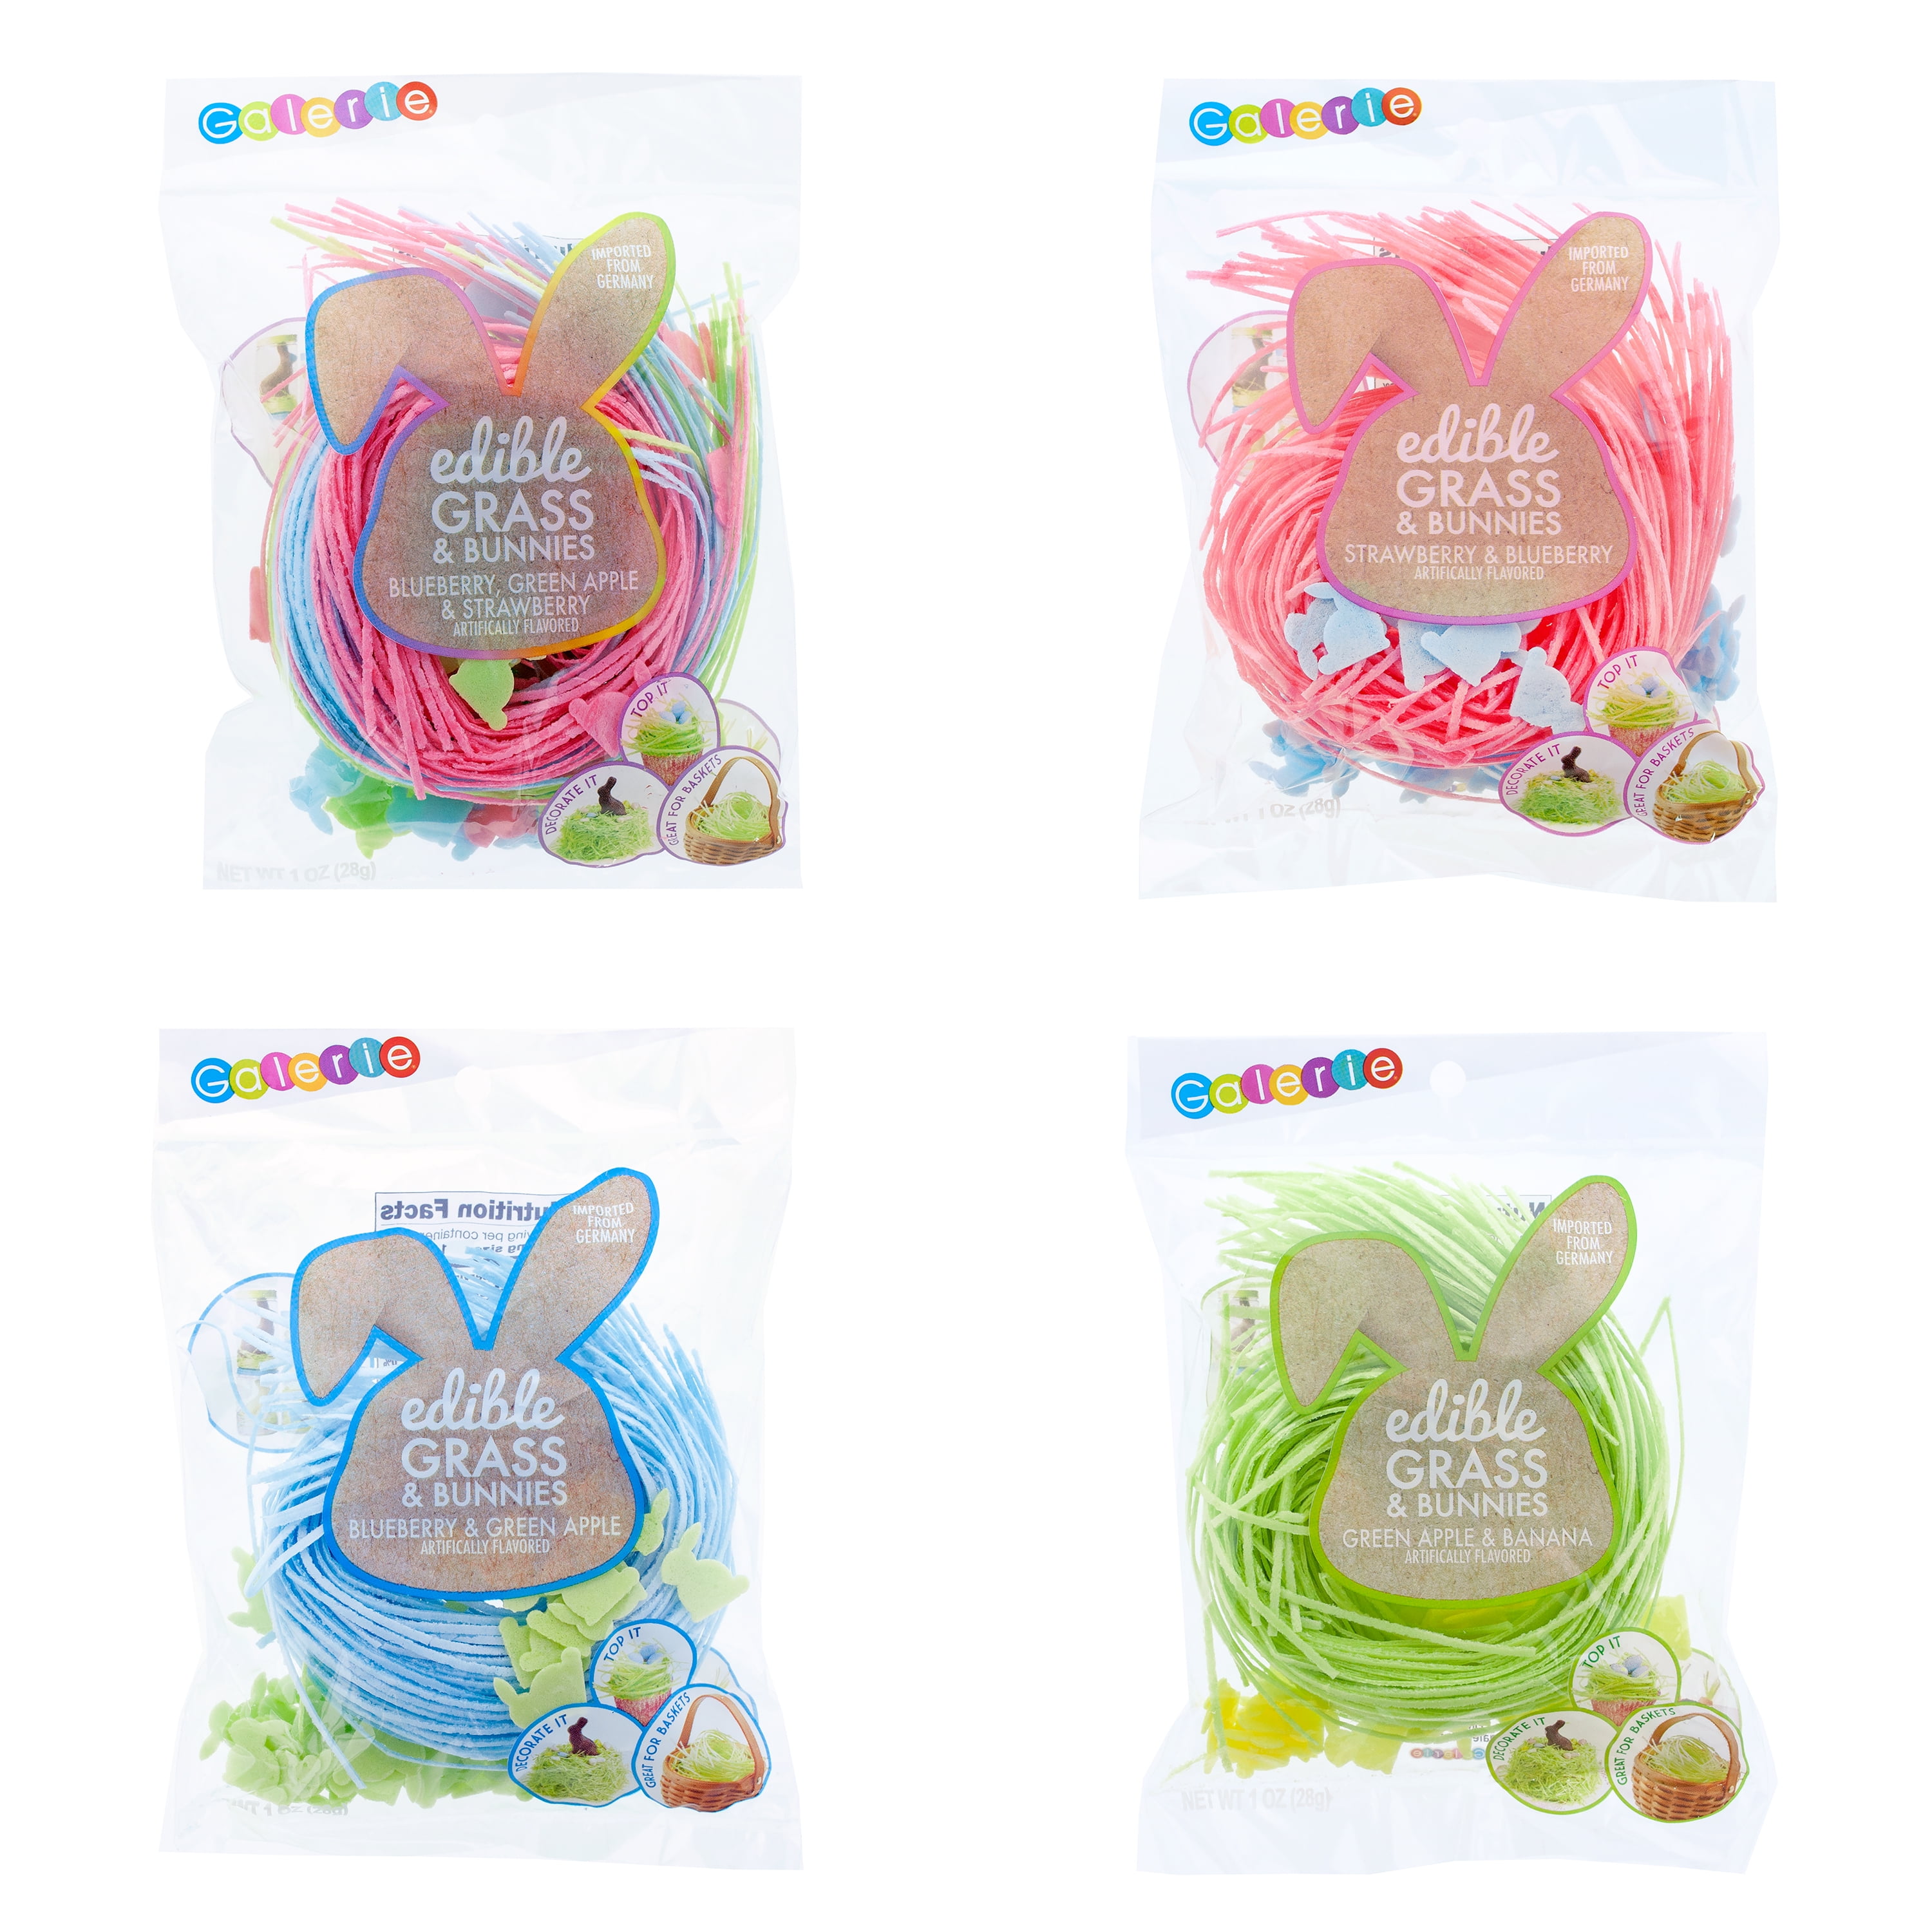 Galerie Edible Grass With Confetti, 1 oz, Assorted Colors